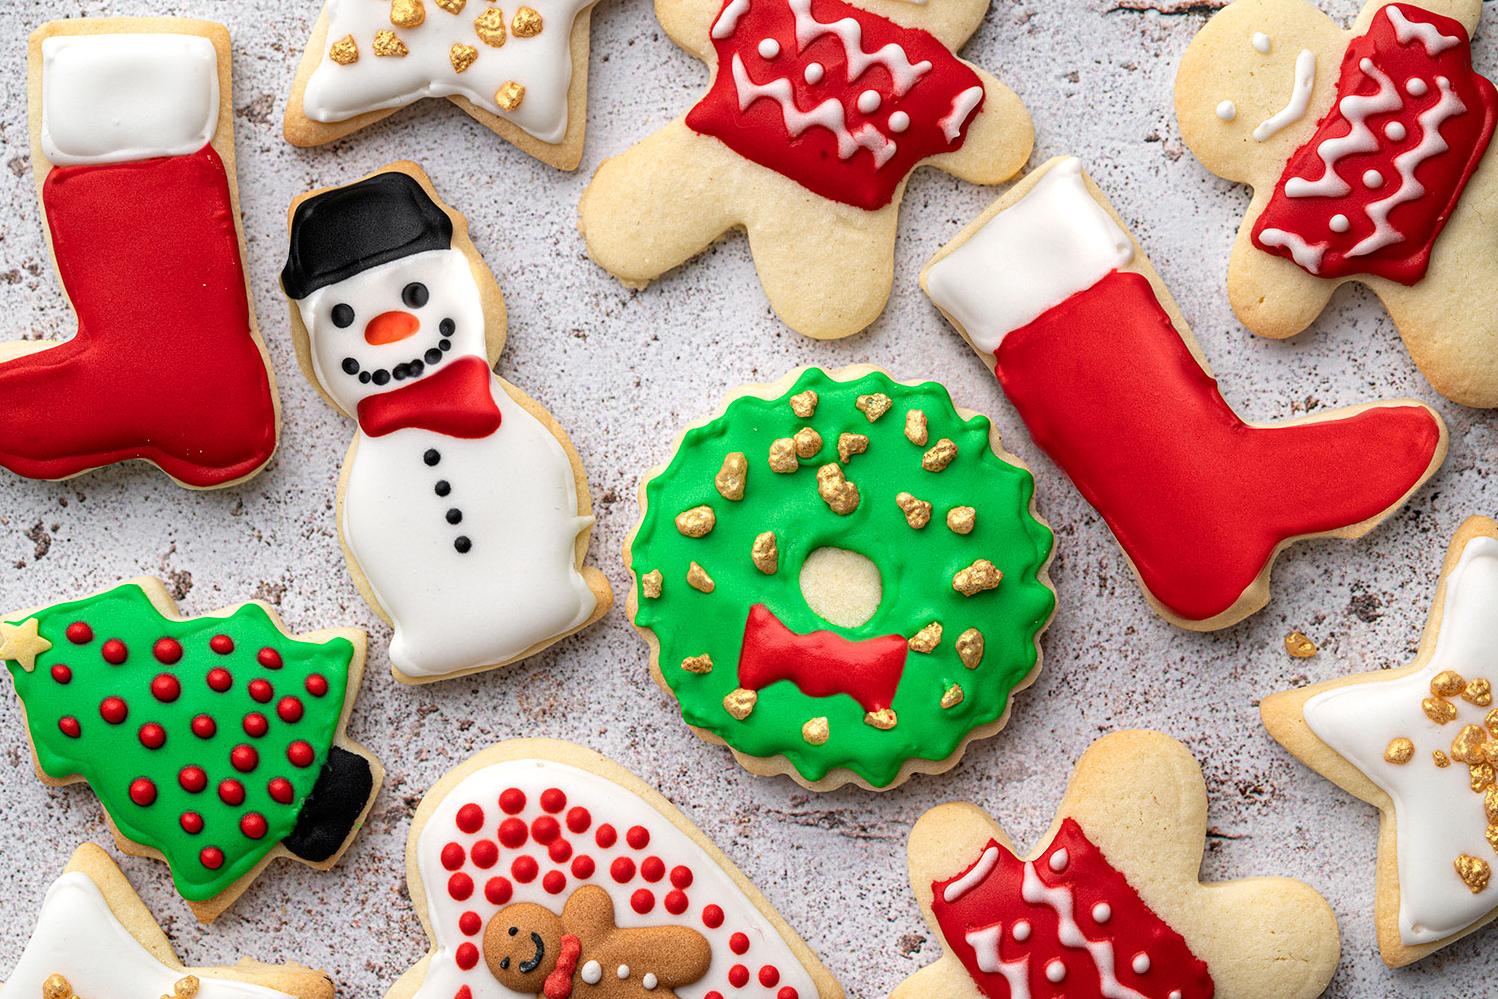  These festive cookies use gluten-free flour that blends perfectly with the other ingredients to make a delicious treat.